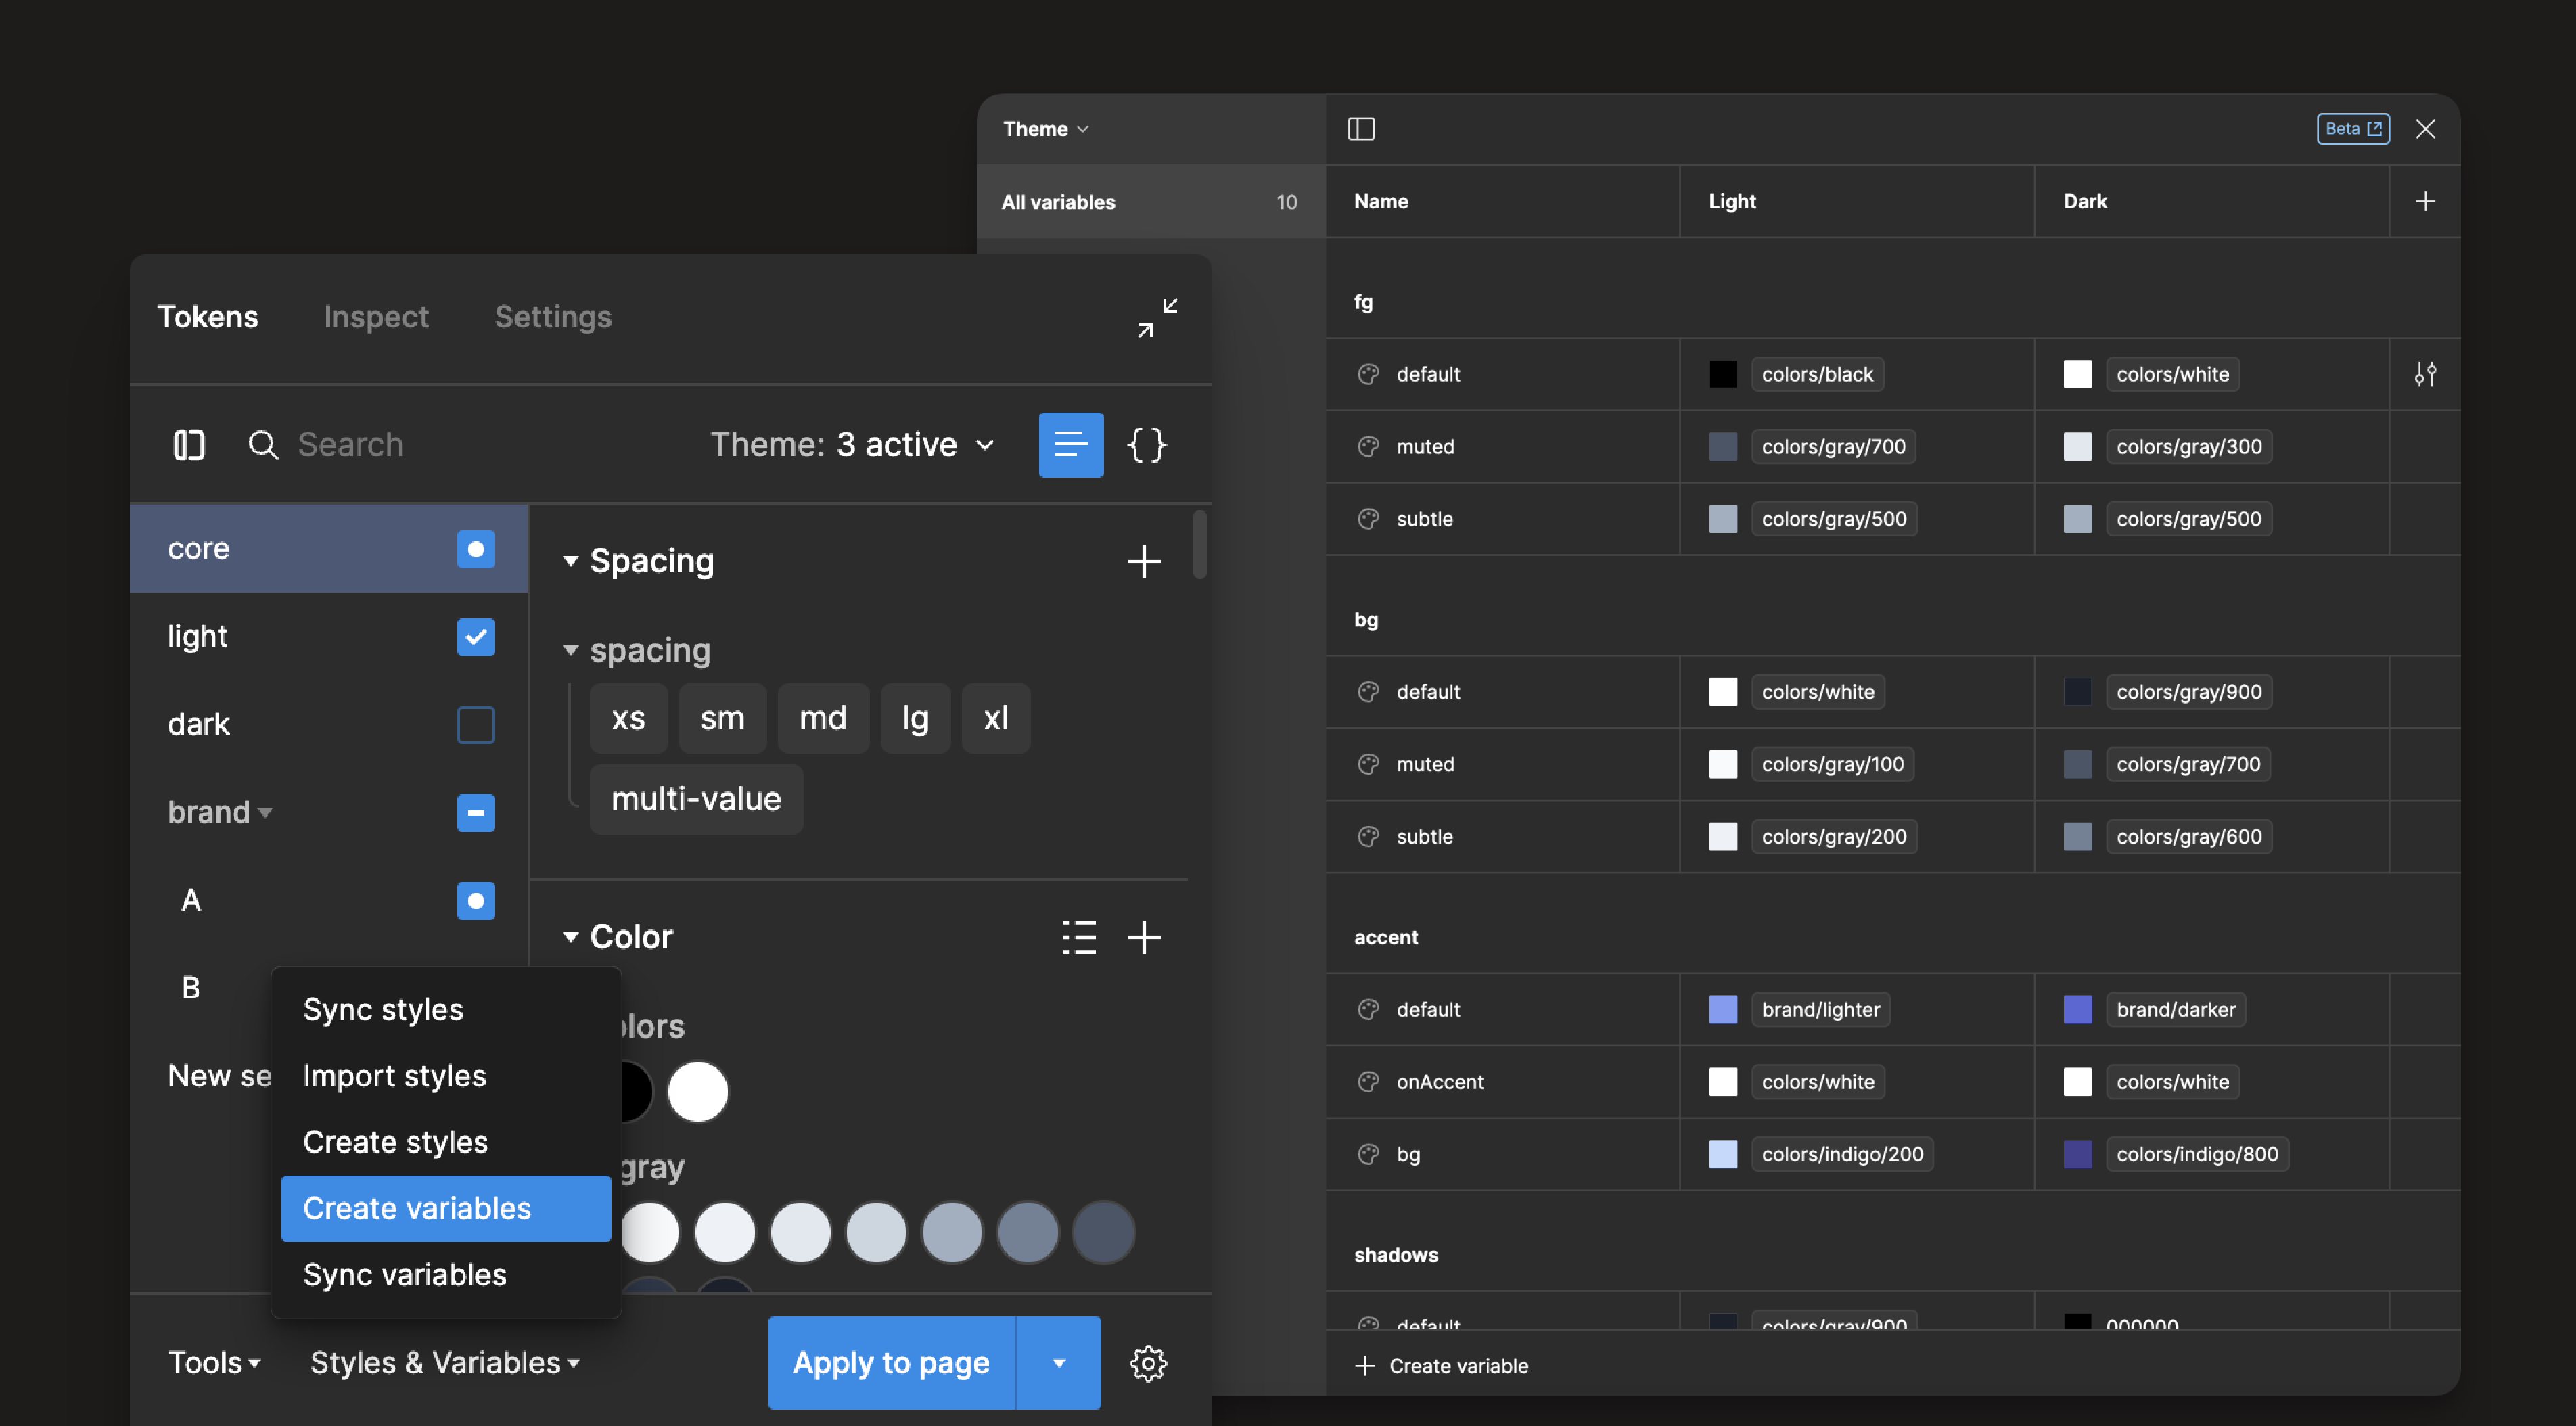 Creating variables in the plugin to create collections in Figma